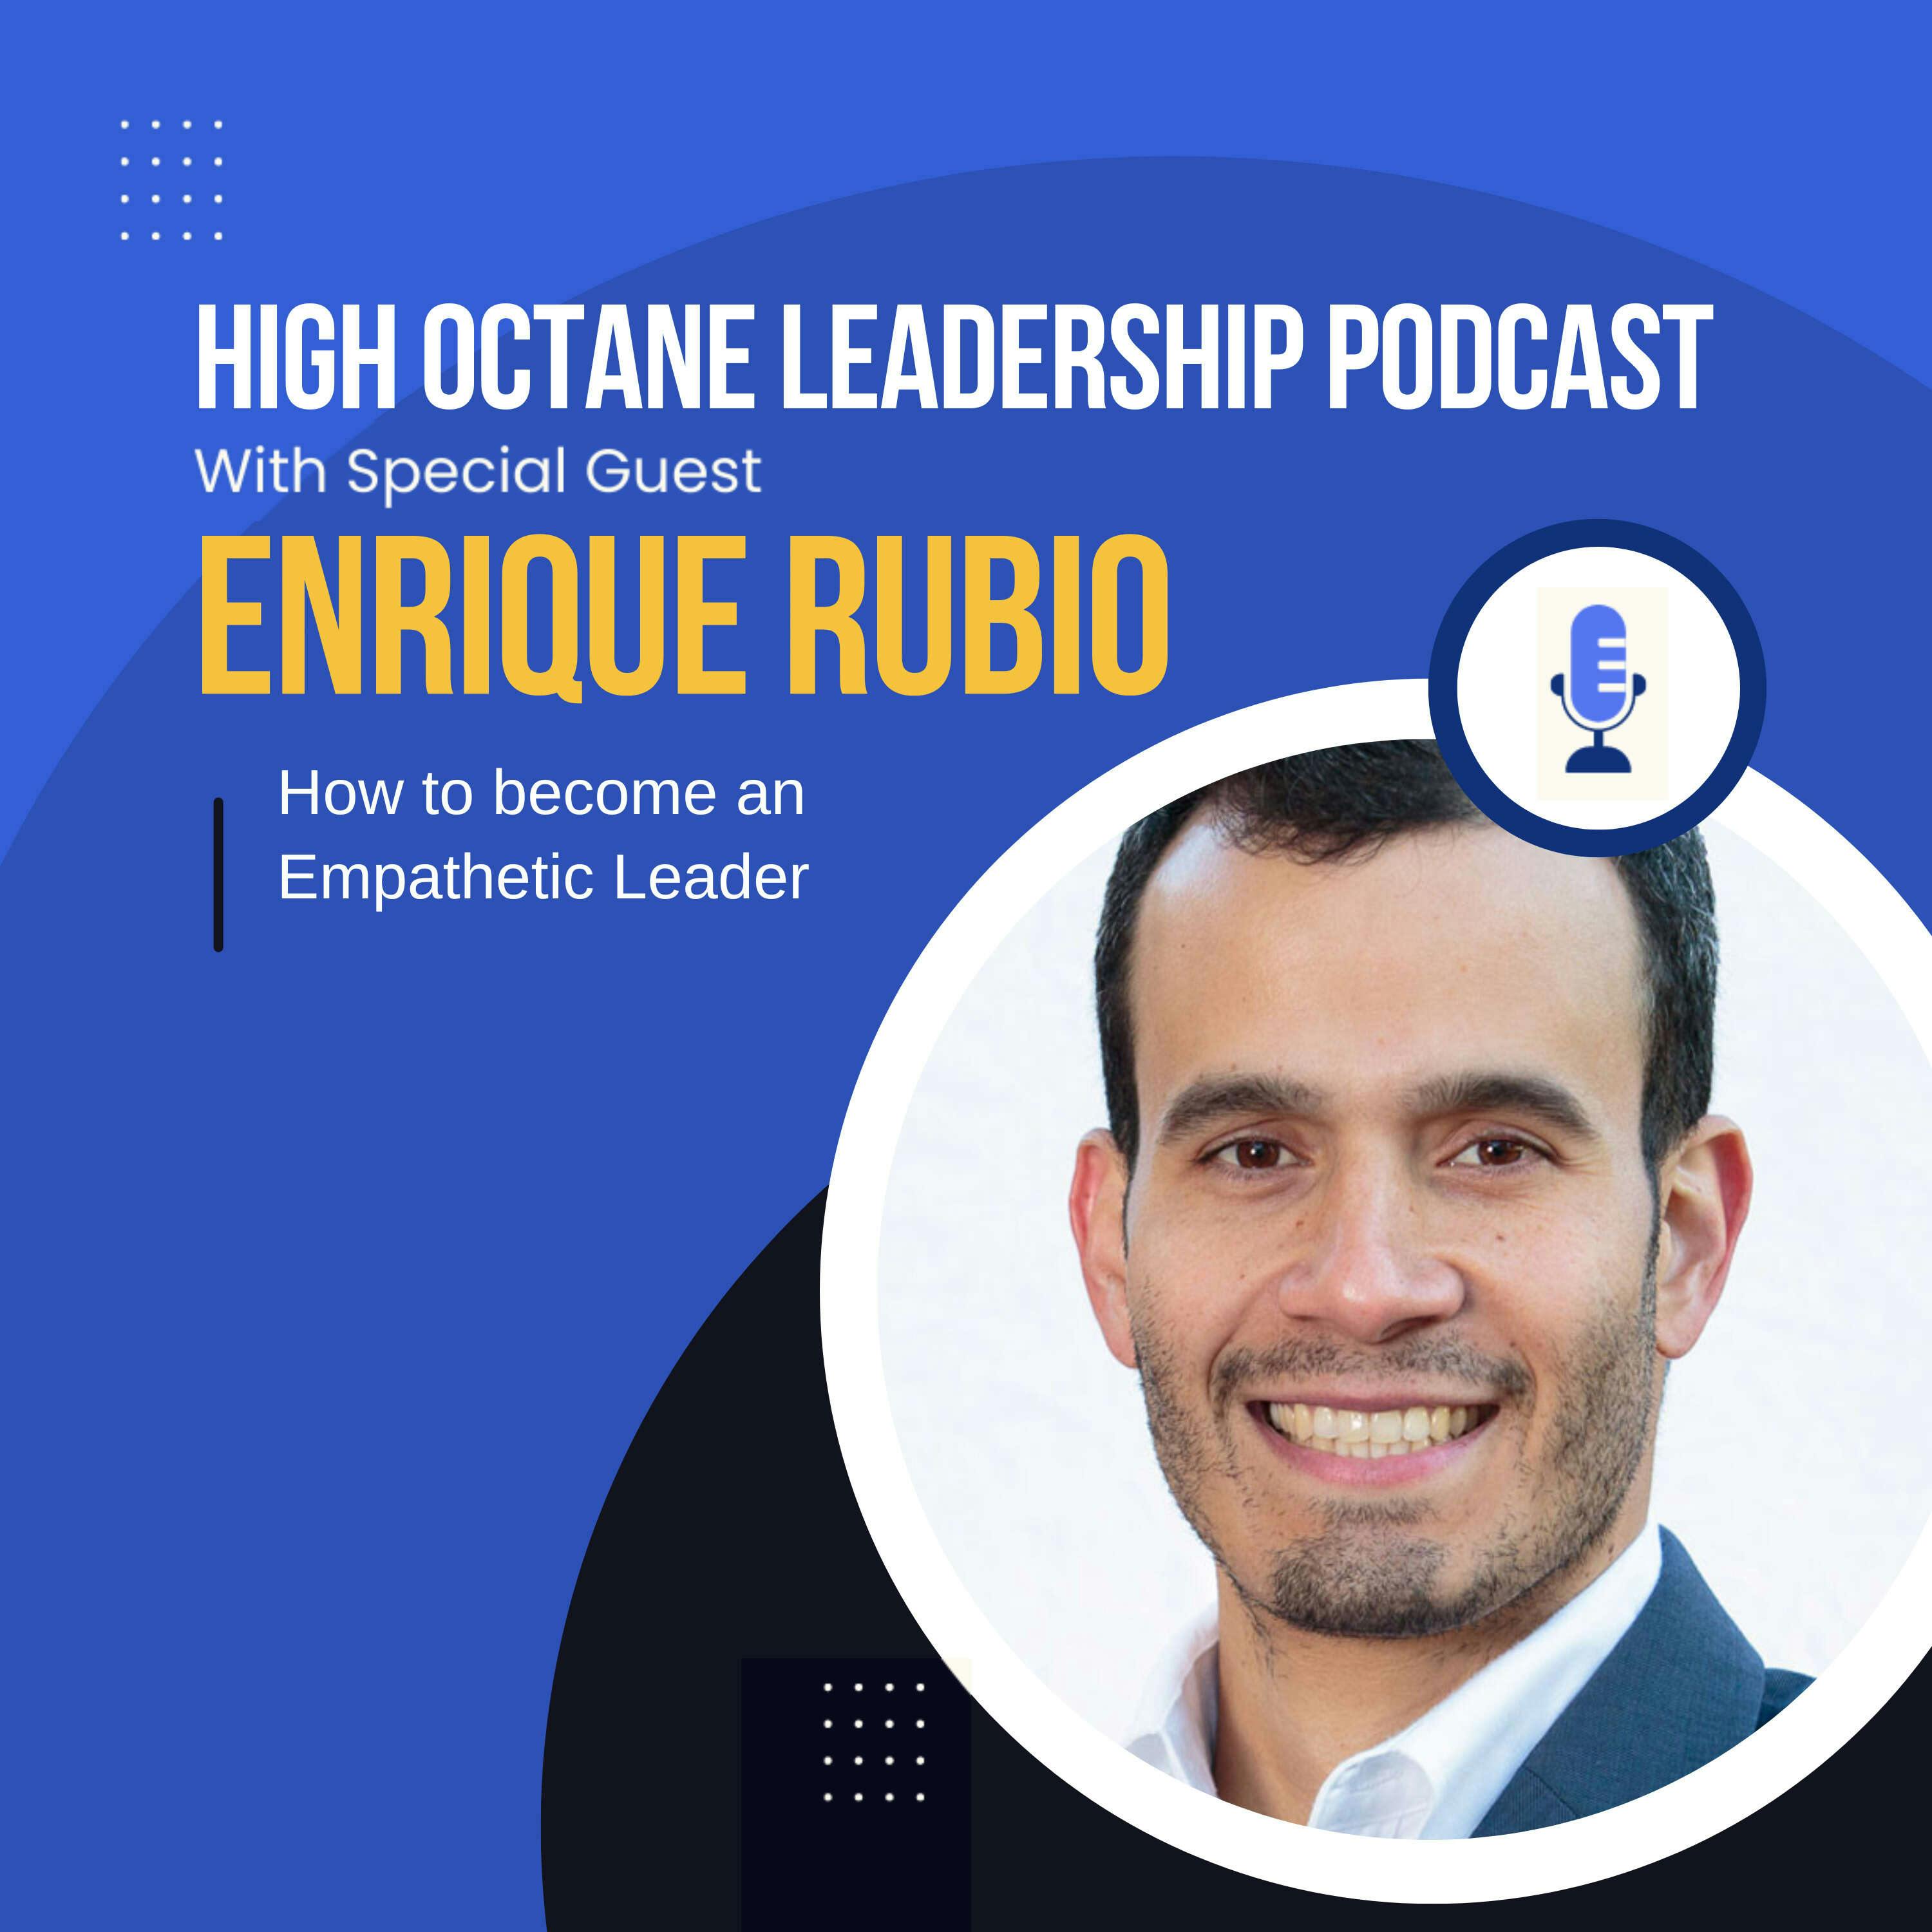 How to become an Empathetic Leader, with Hacking HR's Enrique Rubio